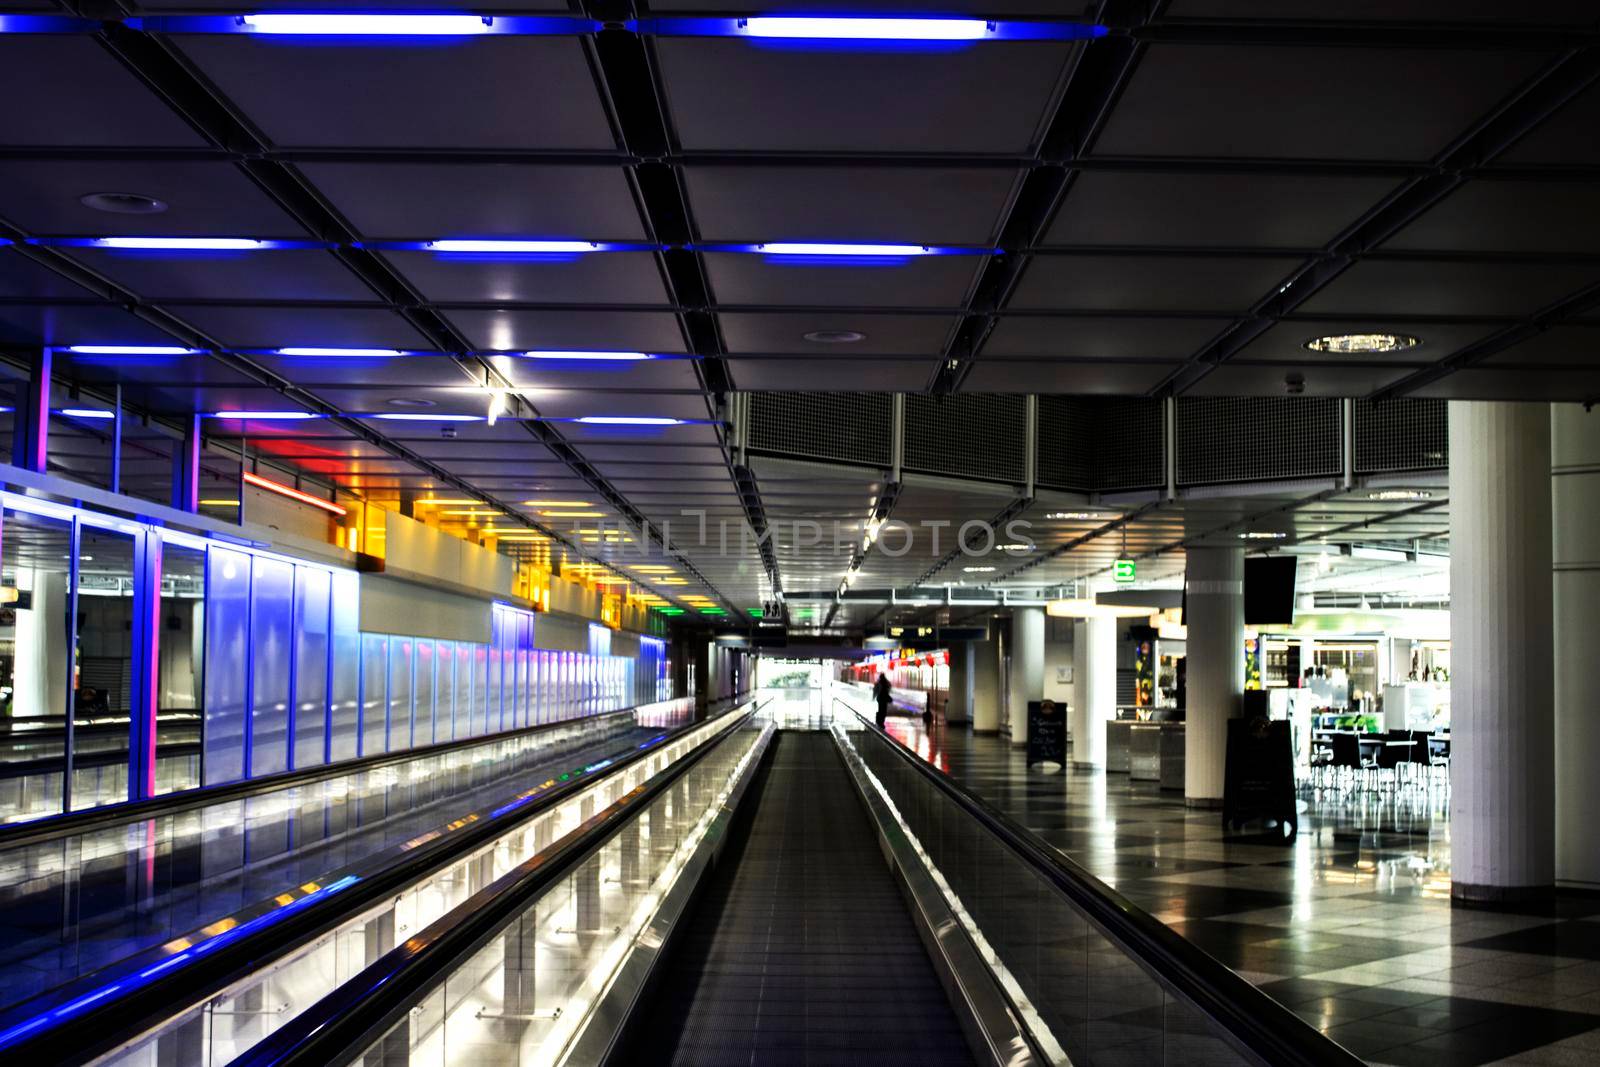 Perspective view of a corridor with a people conveyor belt in an airport